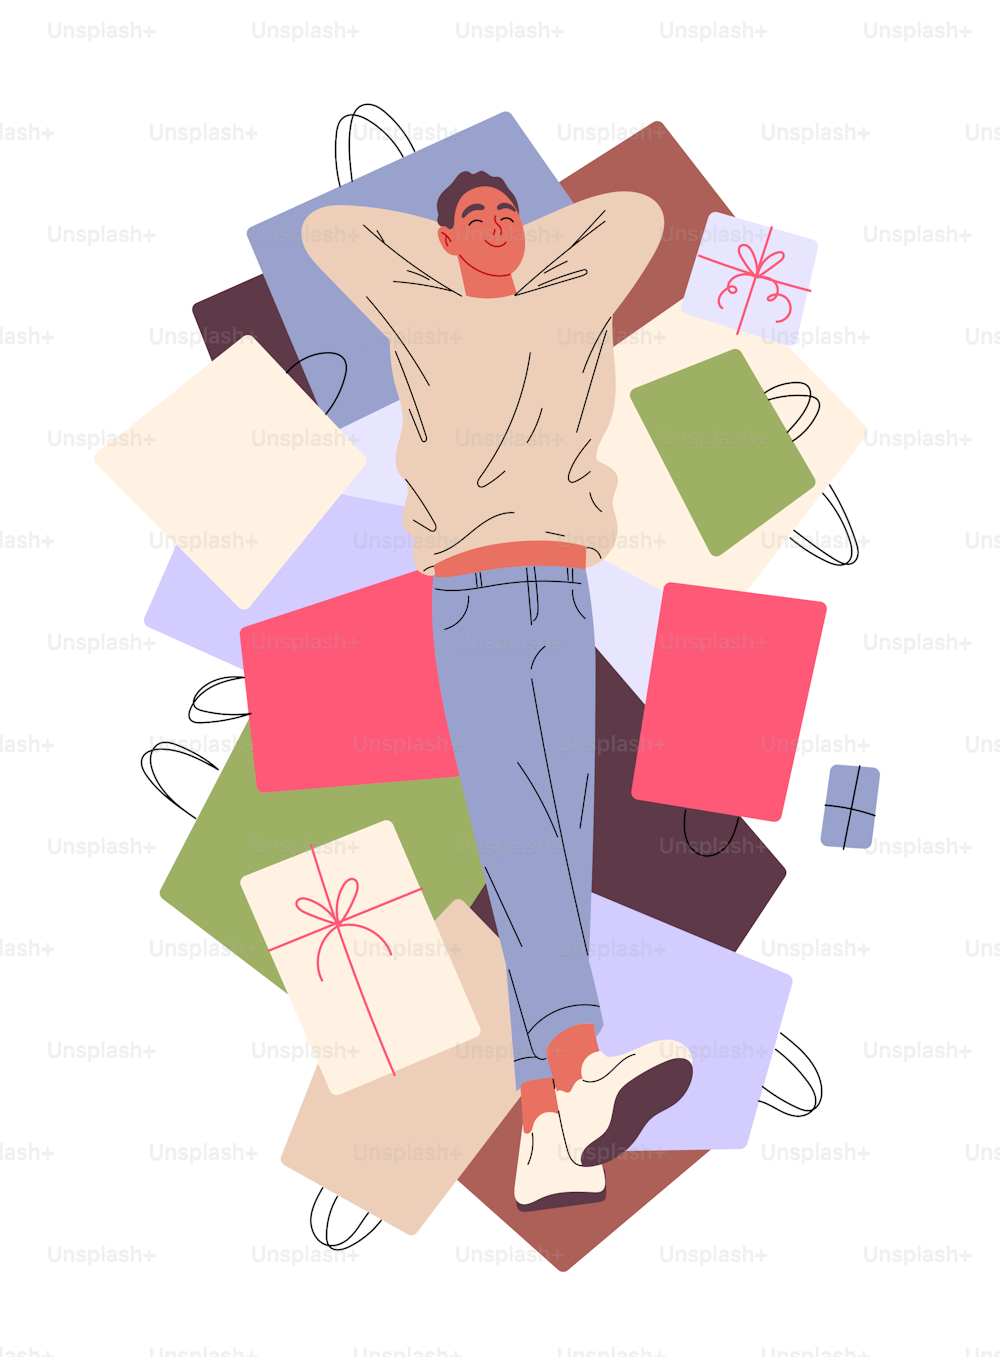 Man lies contentedly on shopping bags.